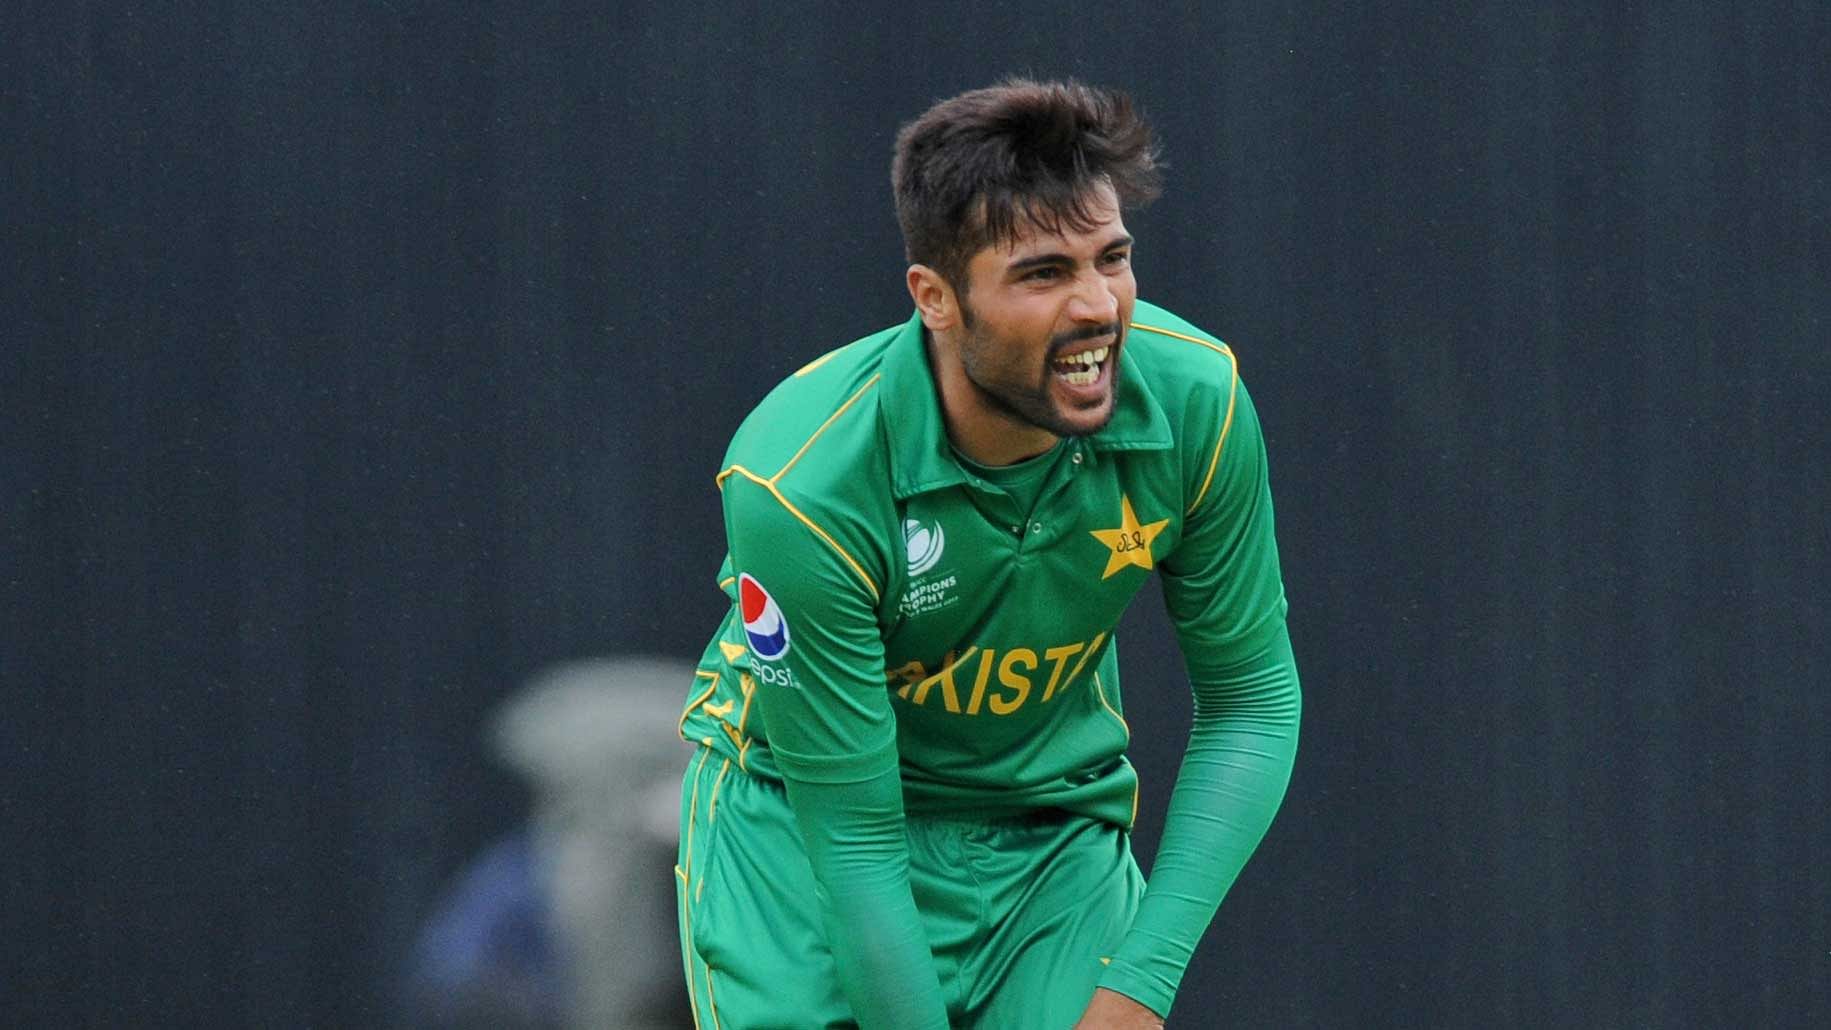 Amir was left out of the 15 member Pakistan squad for the 2019 World Cup